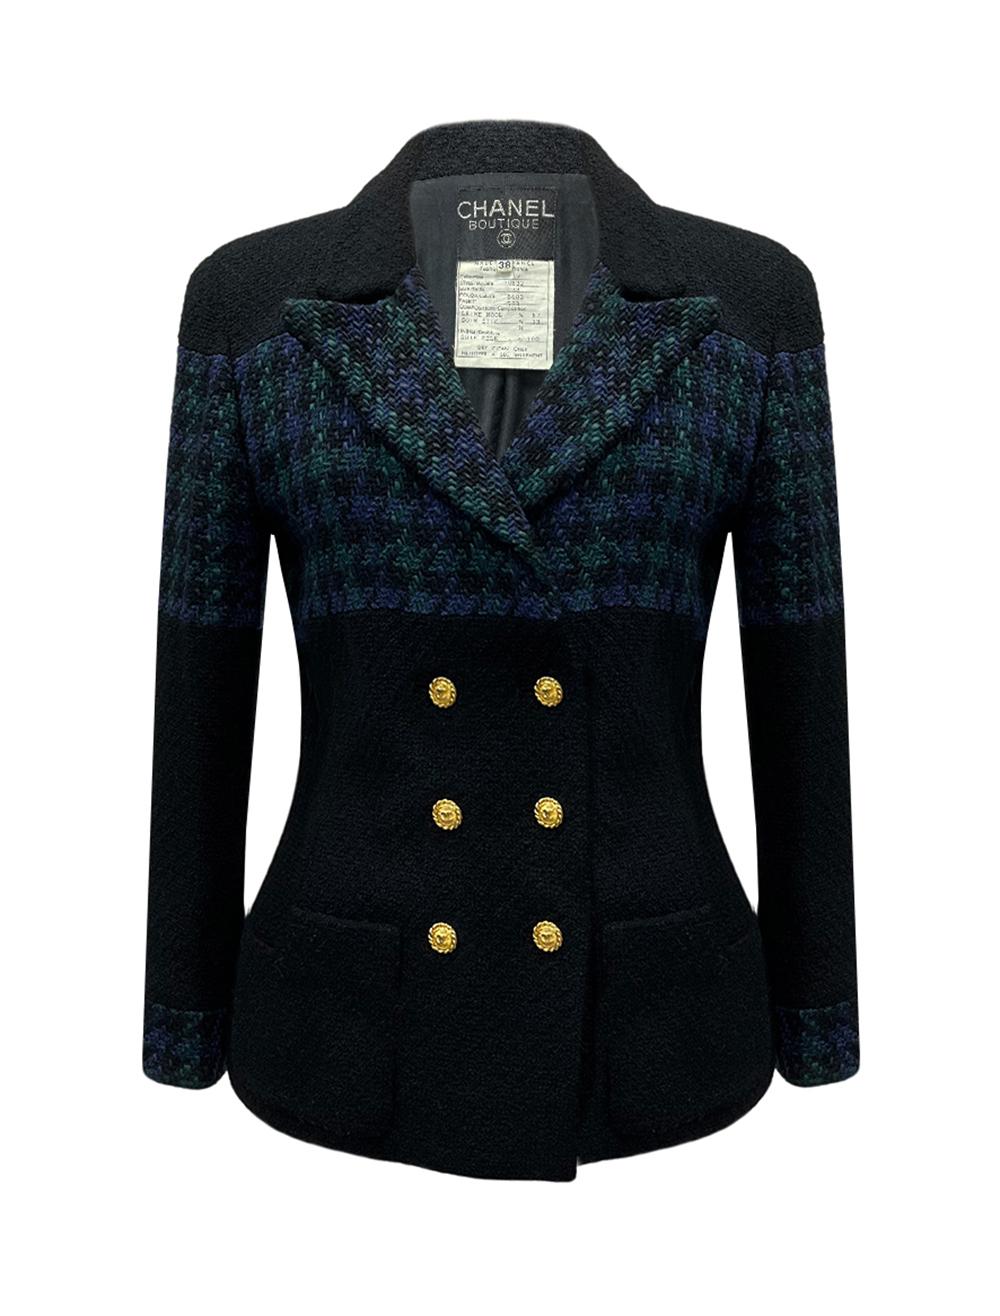 Chanel 1988 Extremely Rare Collectors Black Tweed Jacket 2